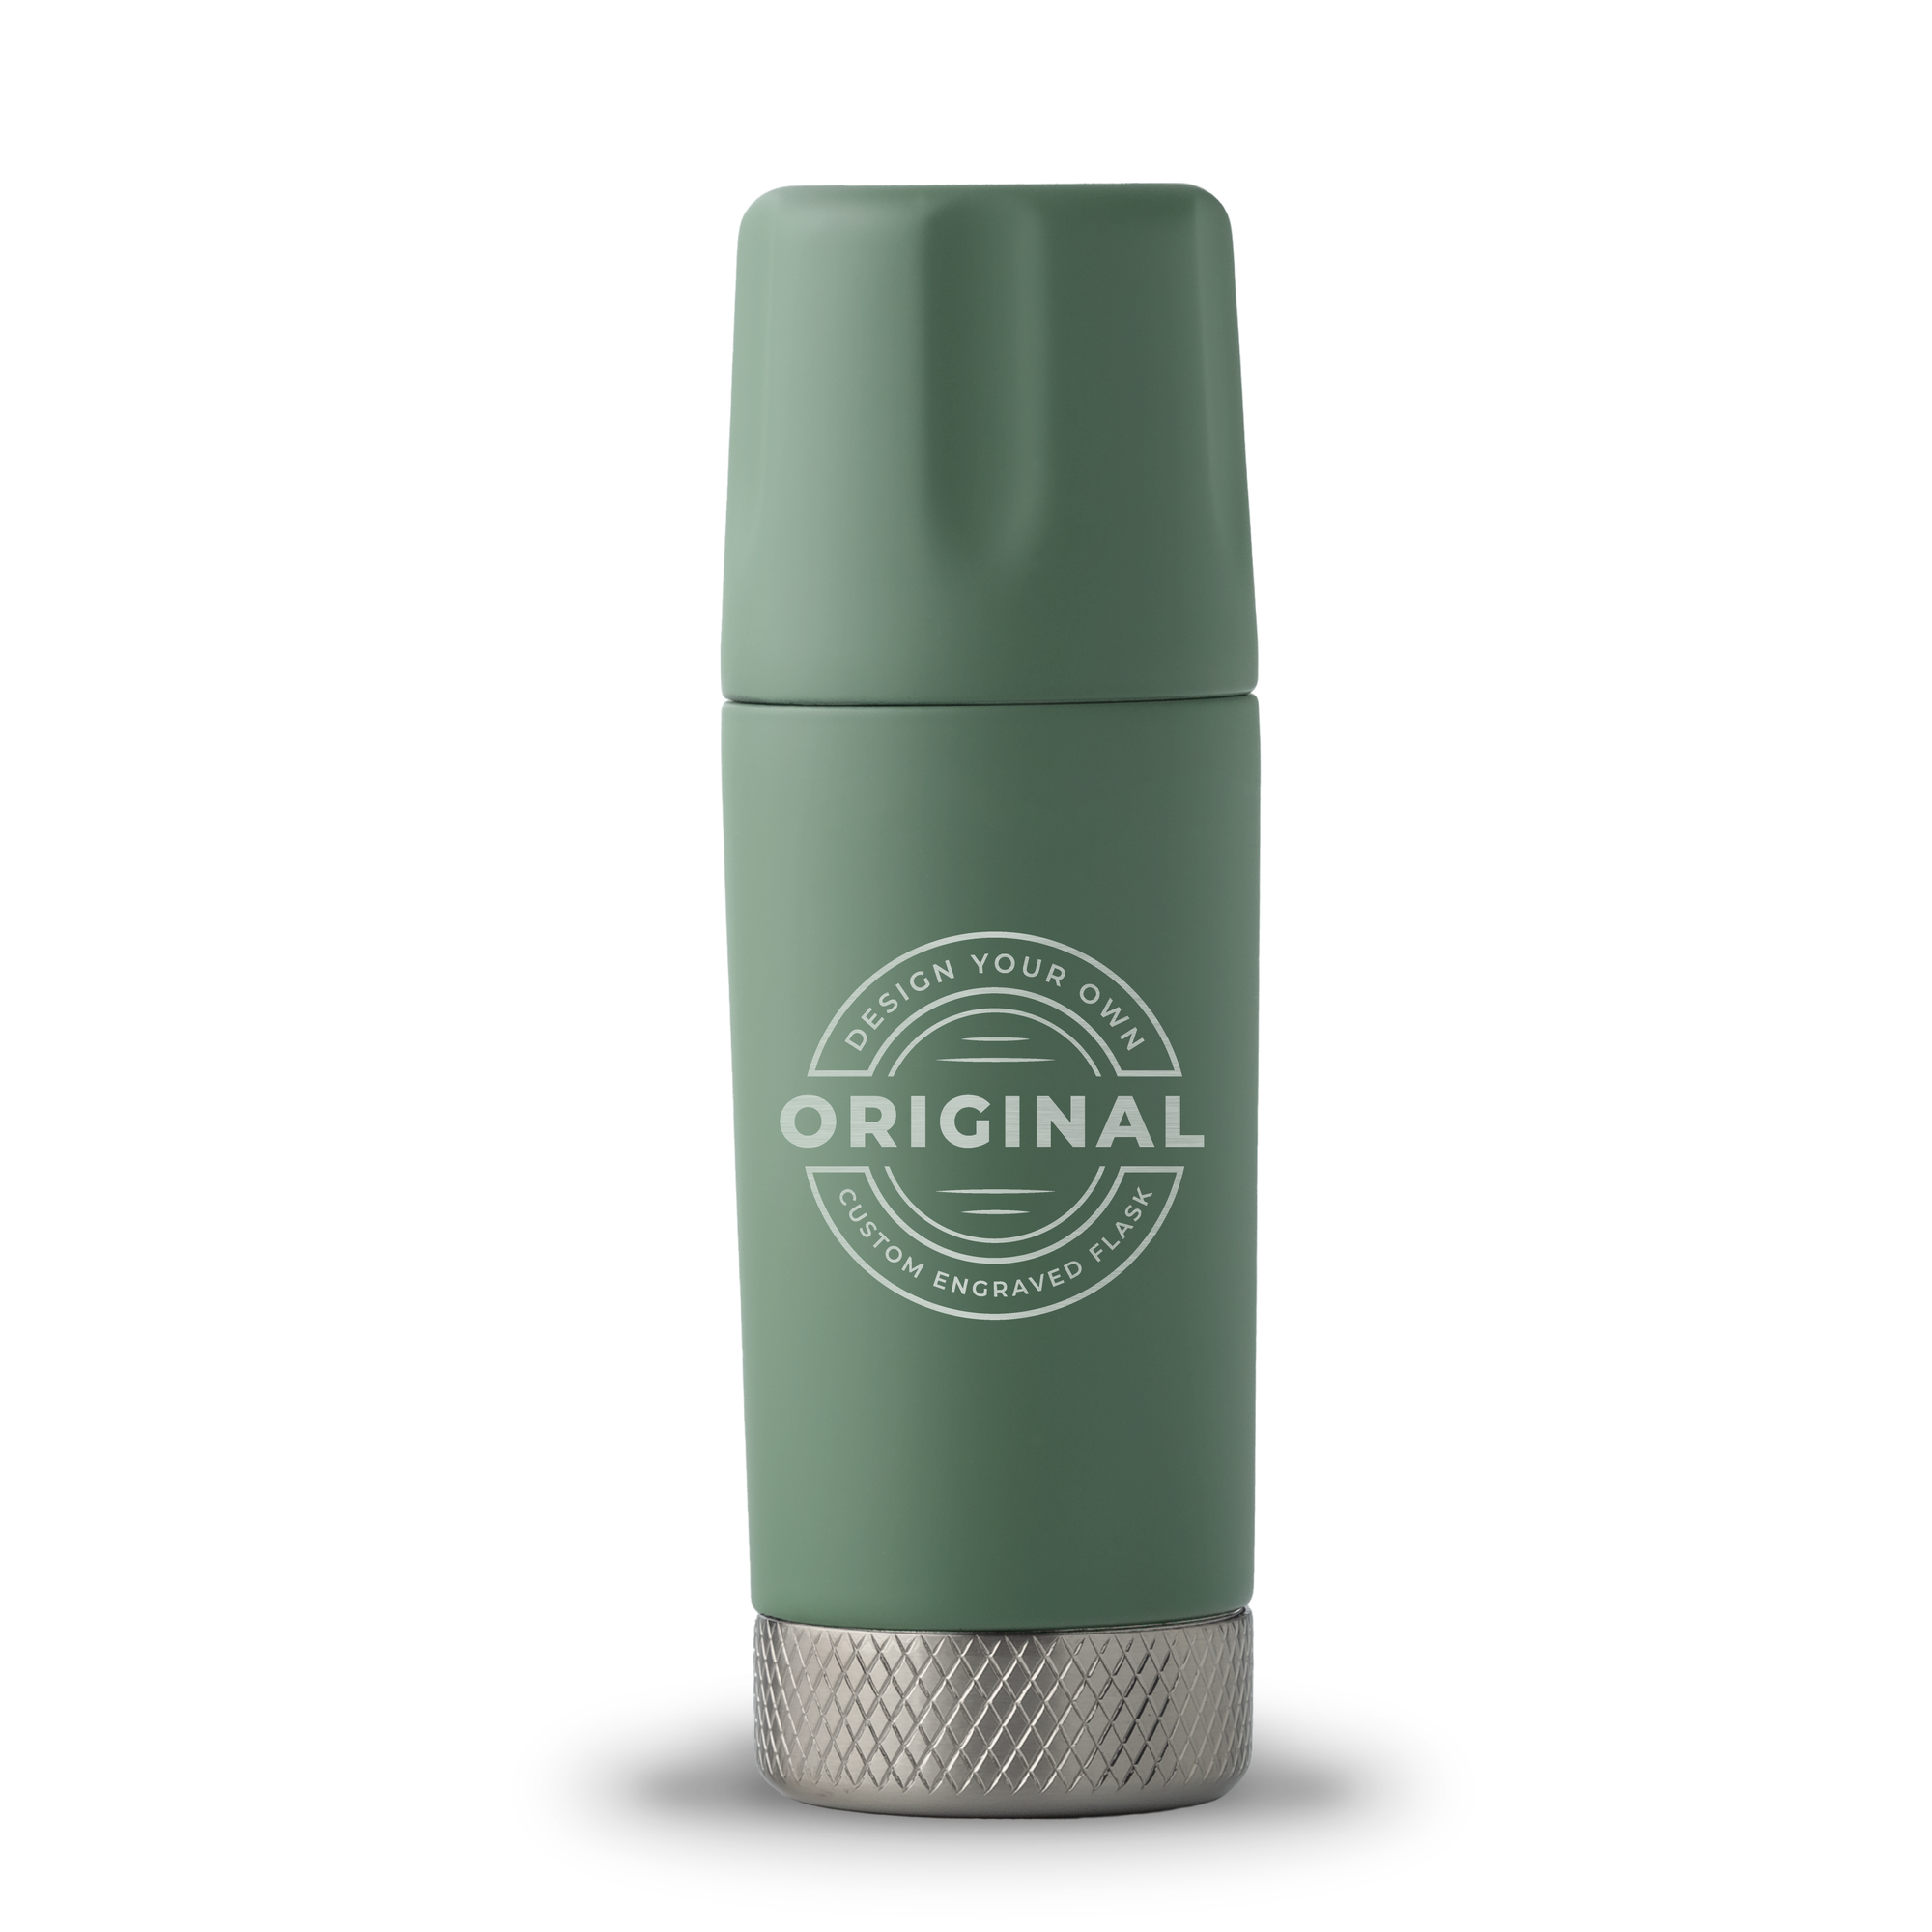 24 Oz. Thermos Flask, Printed Personalized Logo, Promotional Item, 13